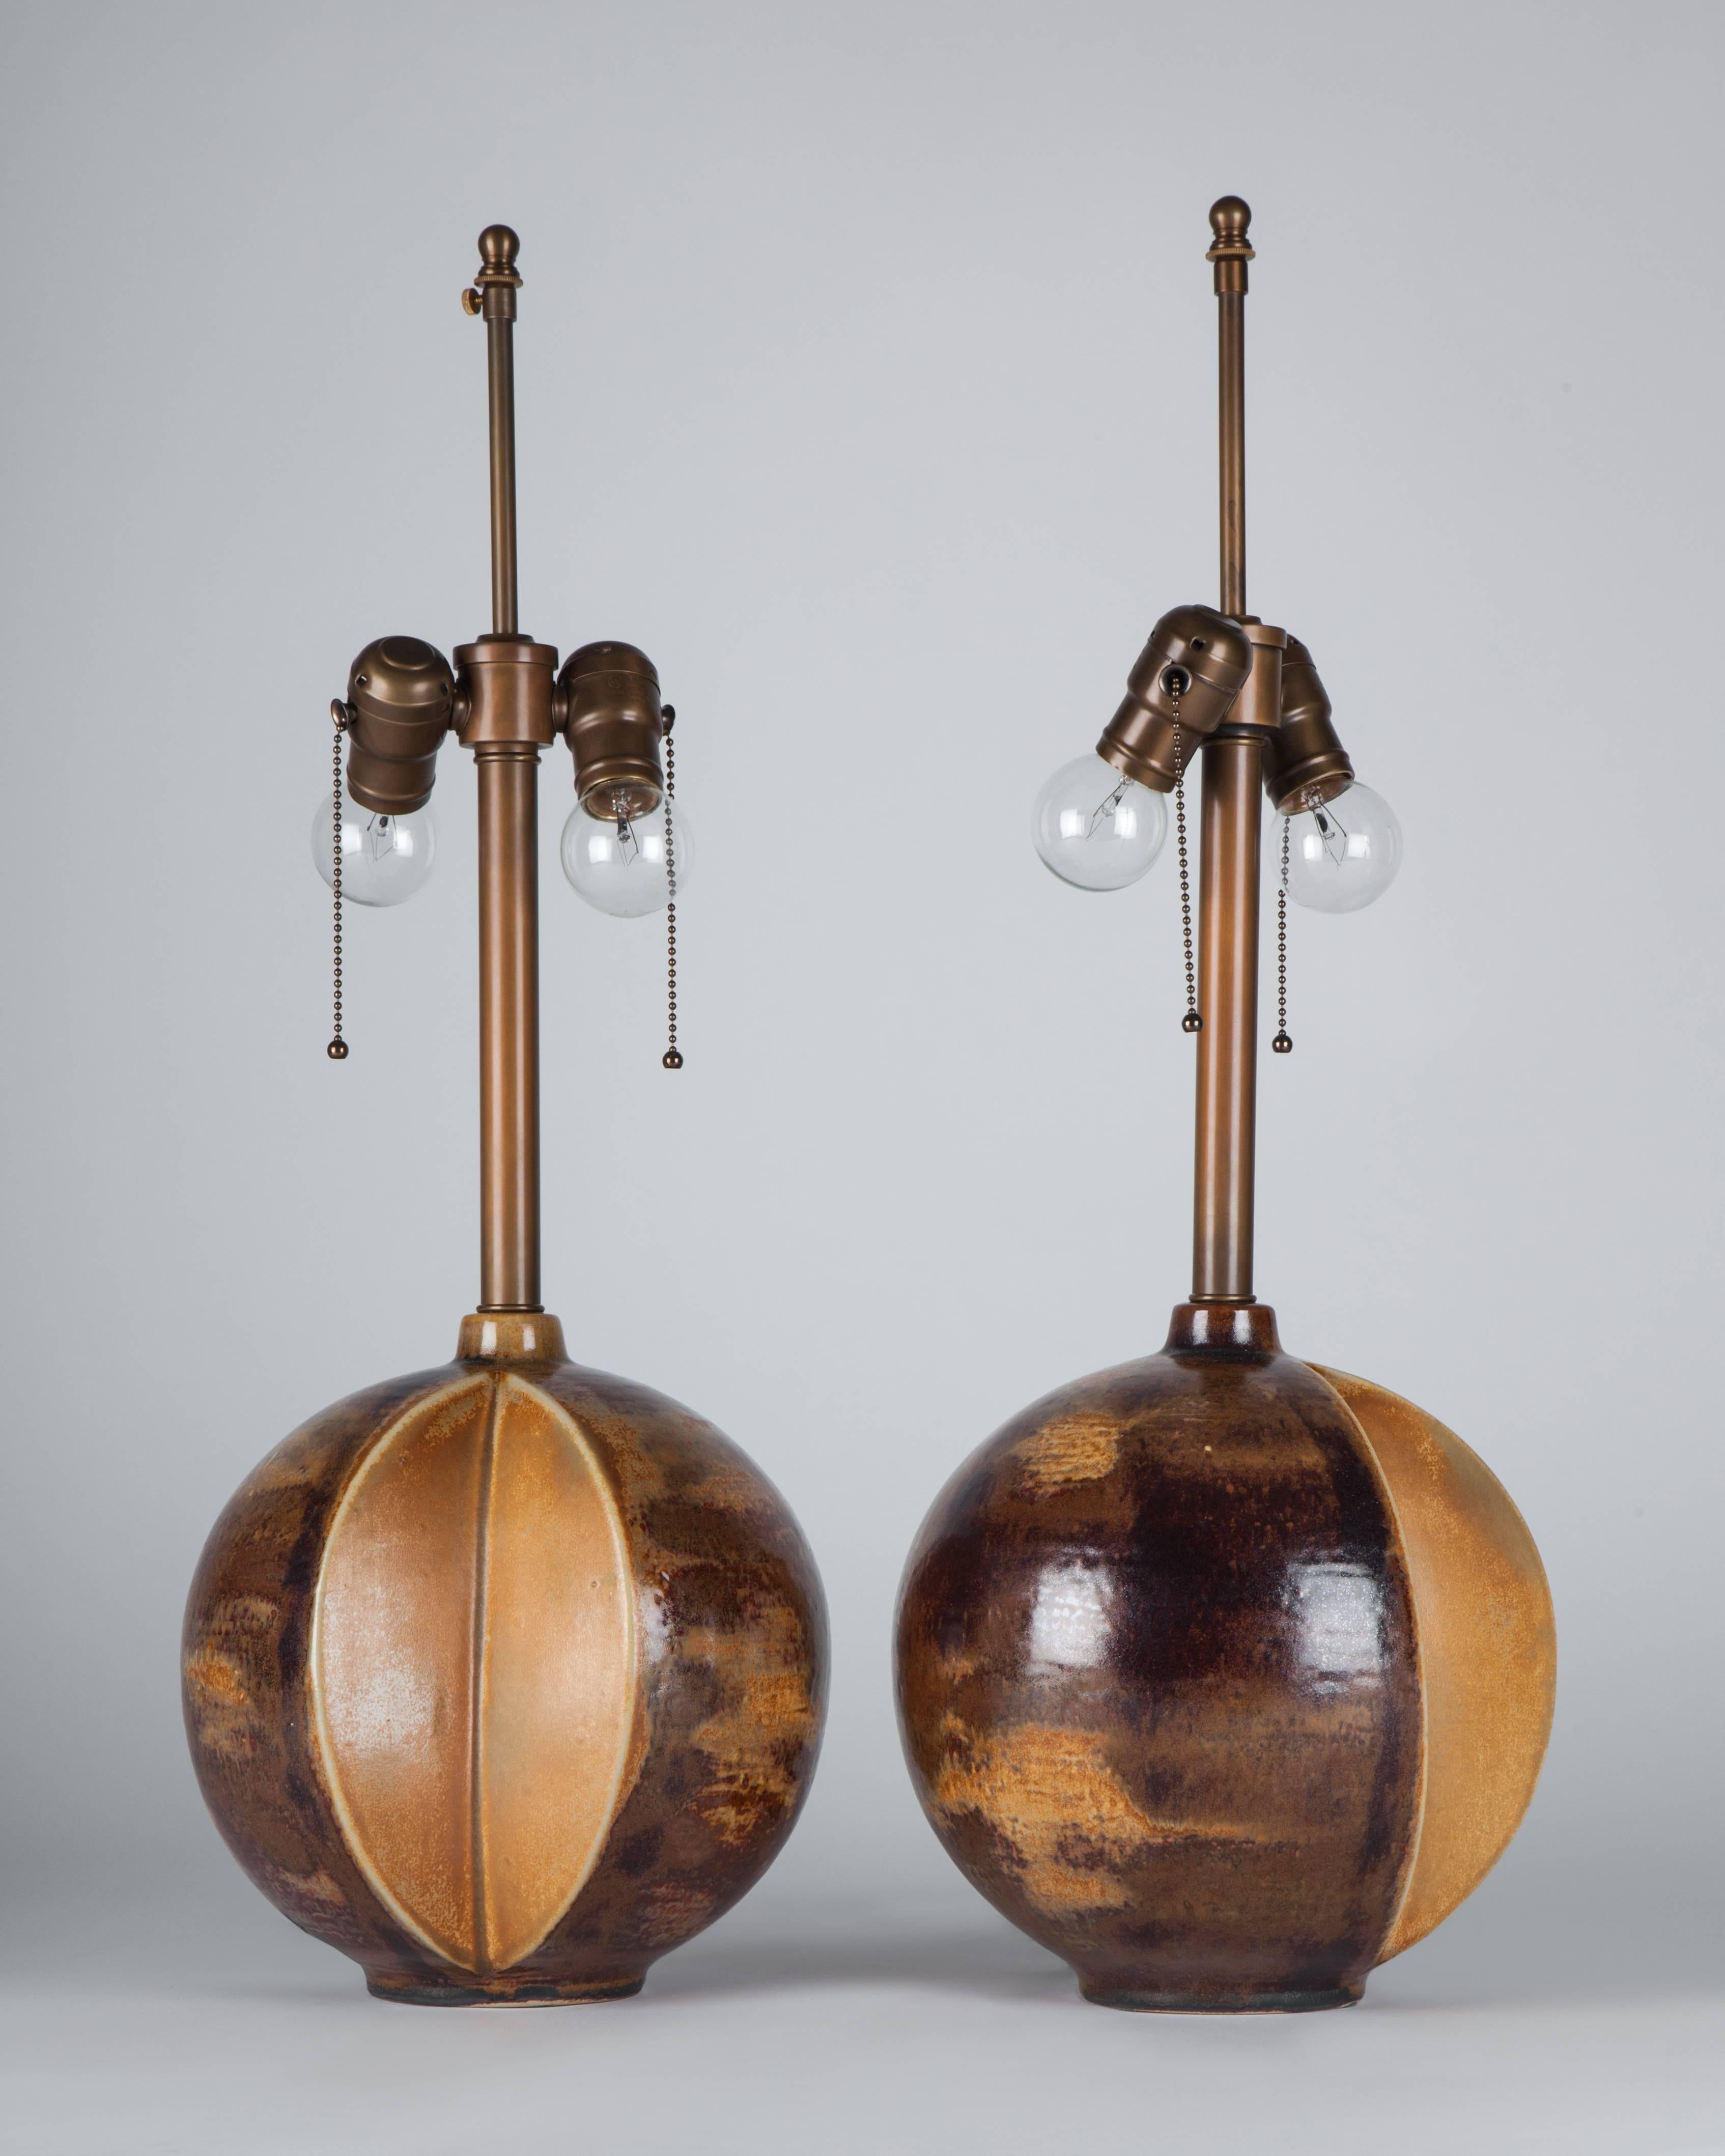 ATL1946
A pair of peri-spherical ceramic lamps having rich, variegated surfaces with iron and rutile bearing glazes. Signed by the Danish maker Soholm Stentoj. Due to the antique nature of these fixtures, there may be some nicks or imperfections in